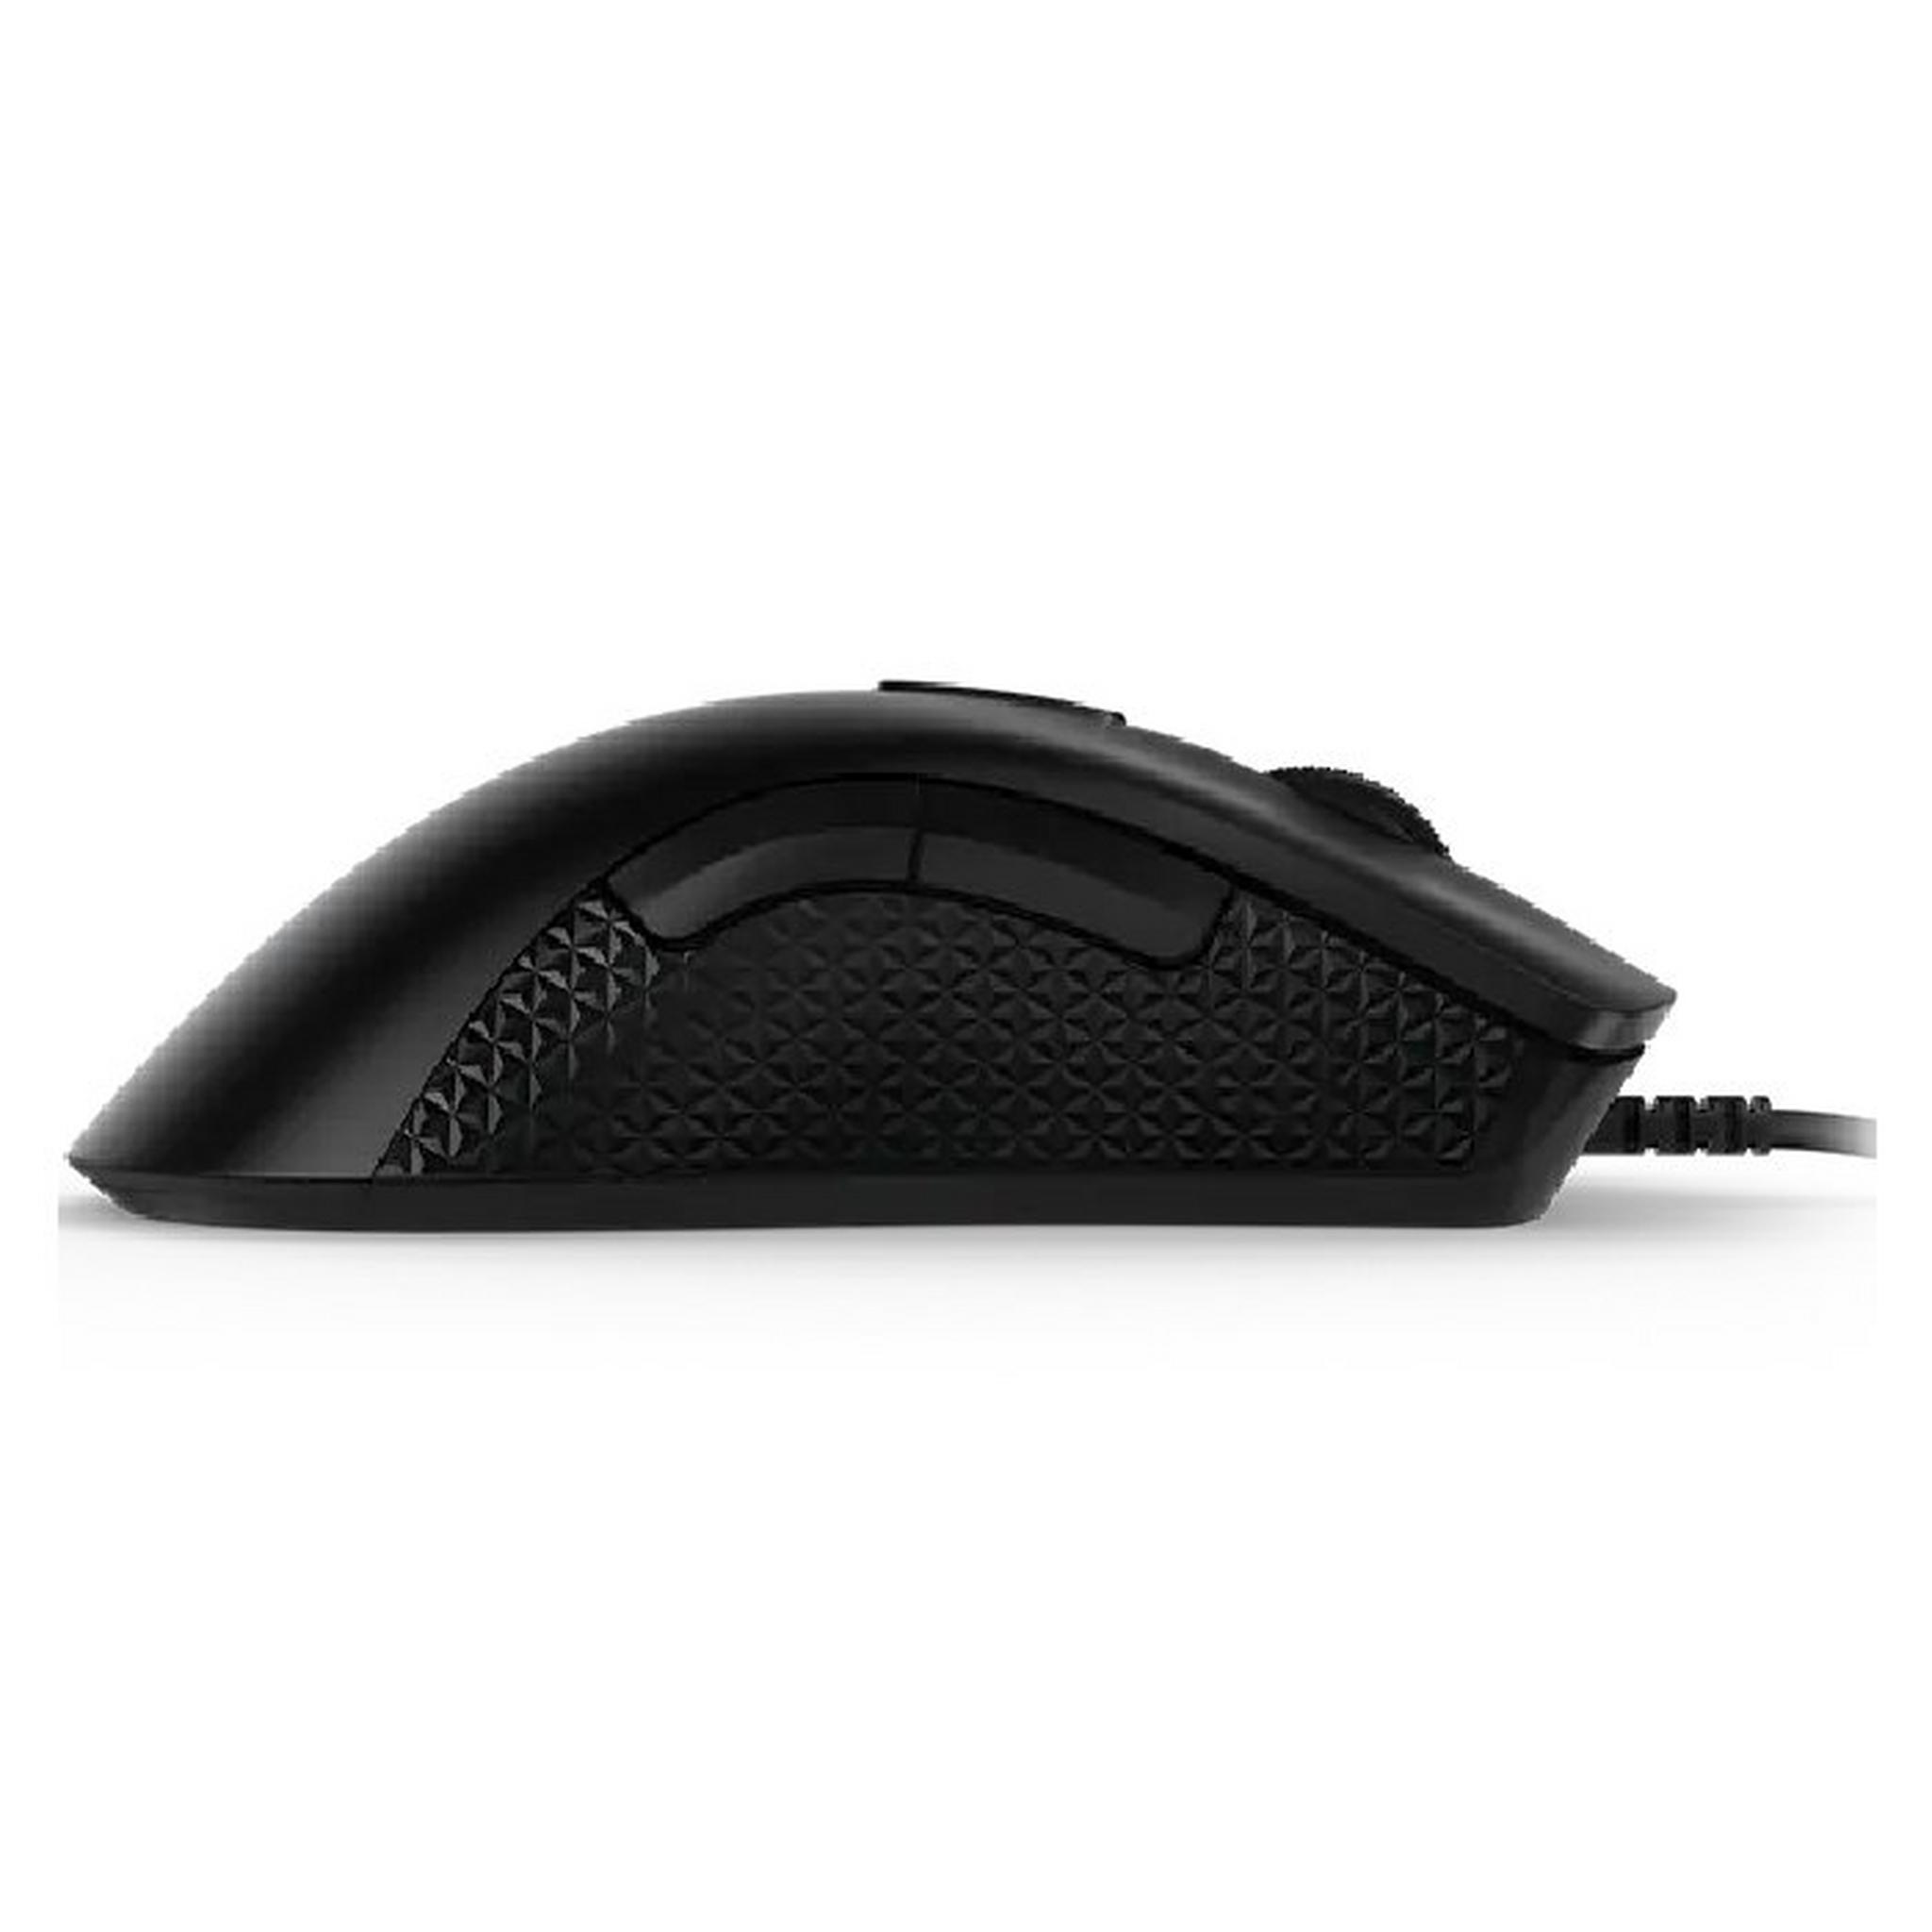 Lenovo Legion Wired Gaming Mouse, M300/RGB, GY50X79384 – Black